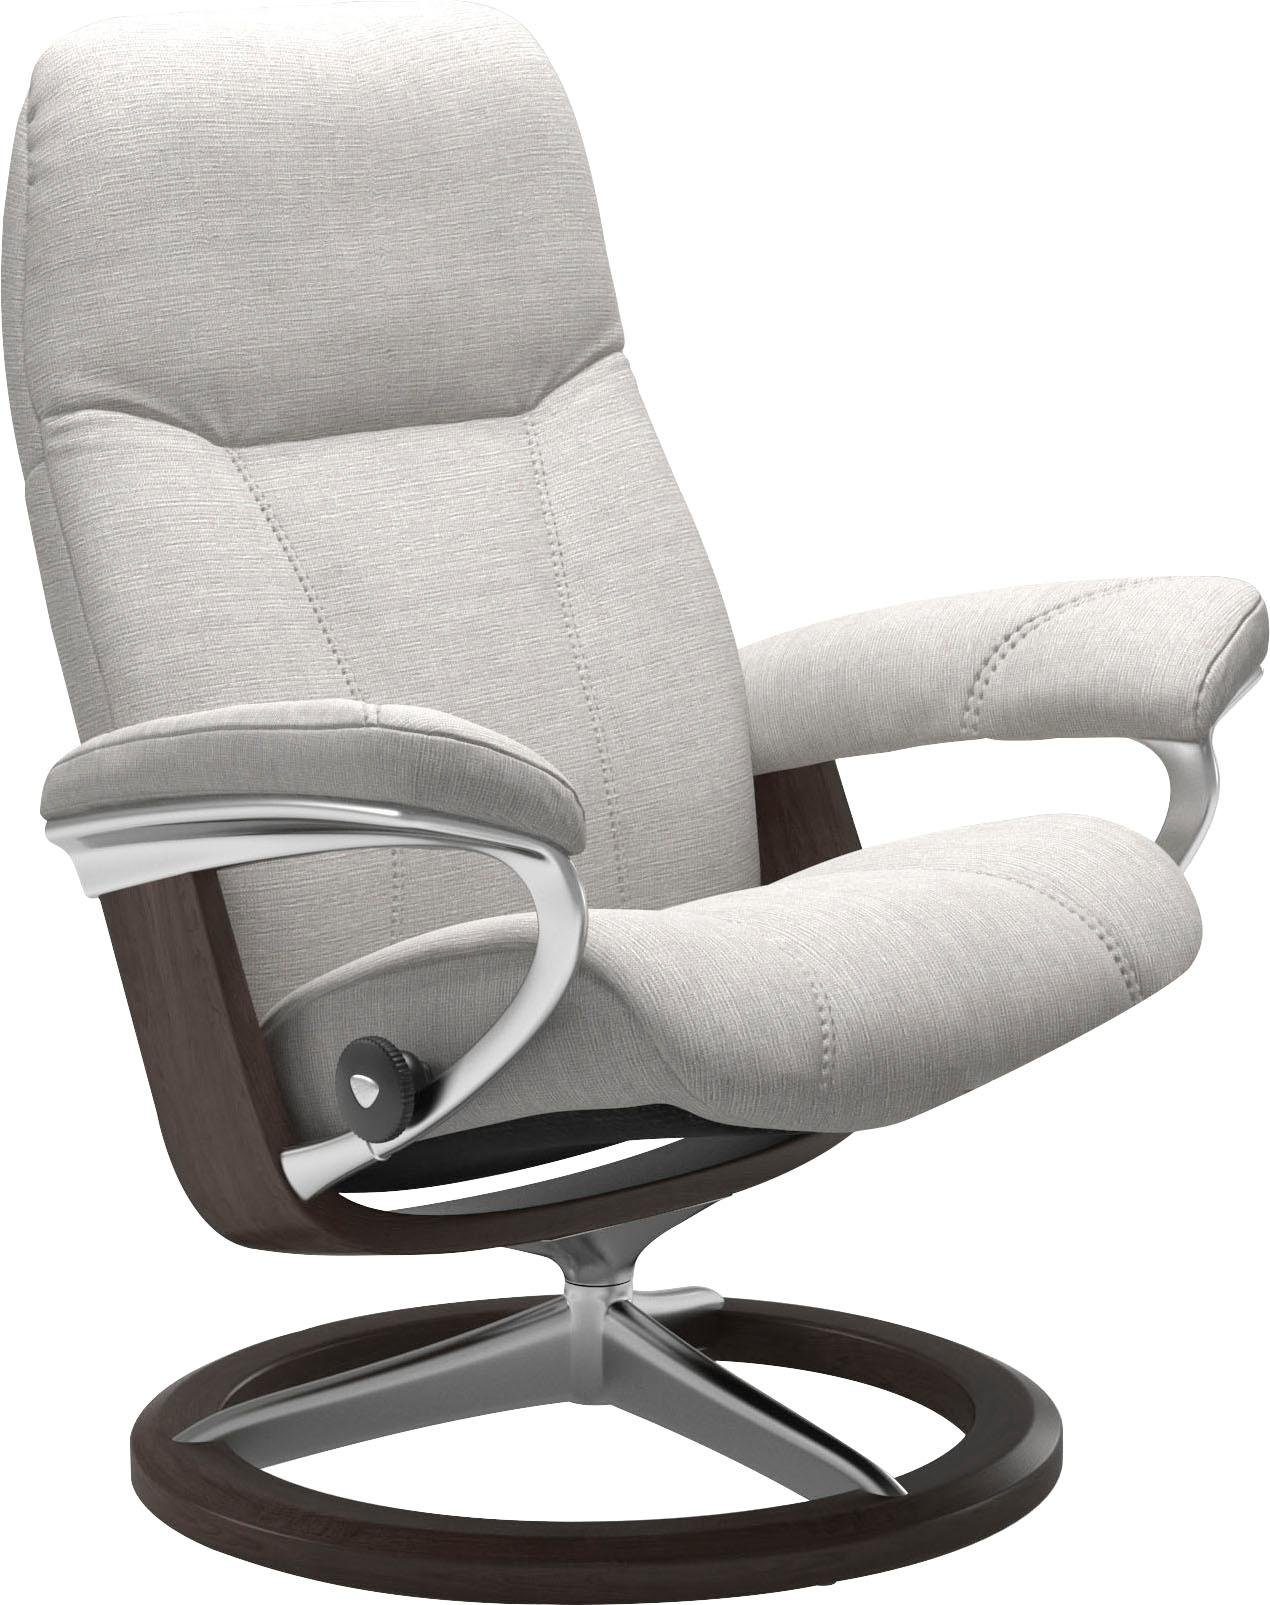 Relaxsessel Base, L, Consul, Wenge Gestell Signature Größe Stressless® mit